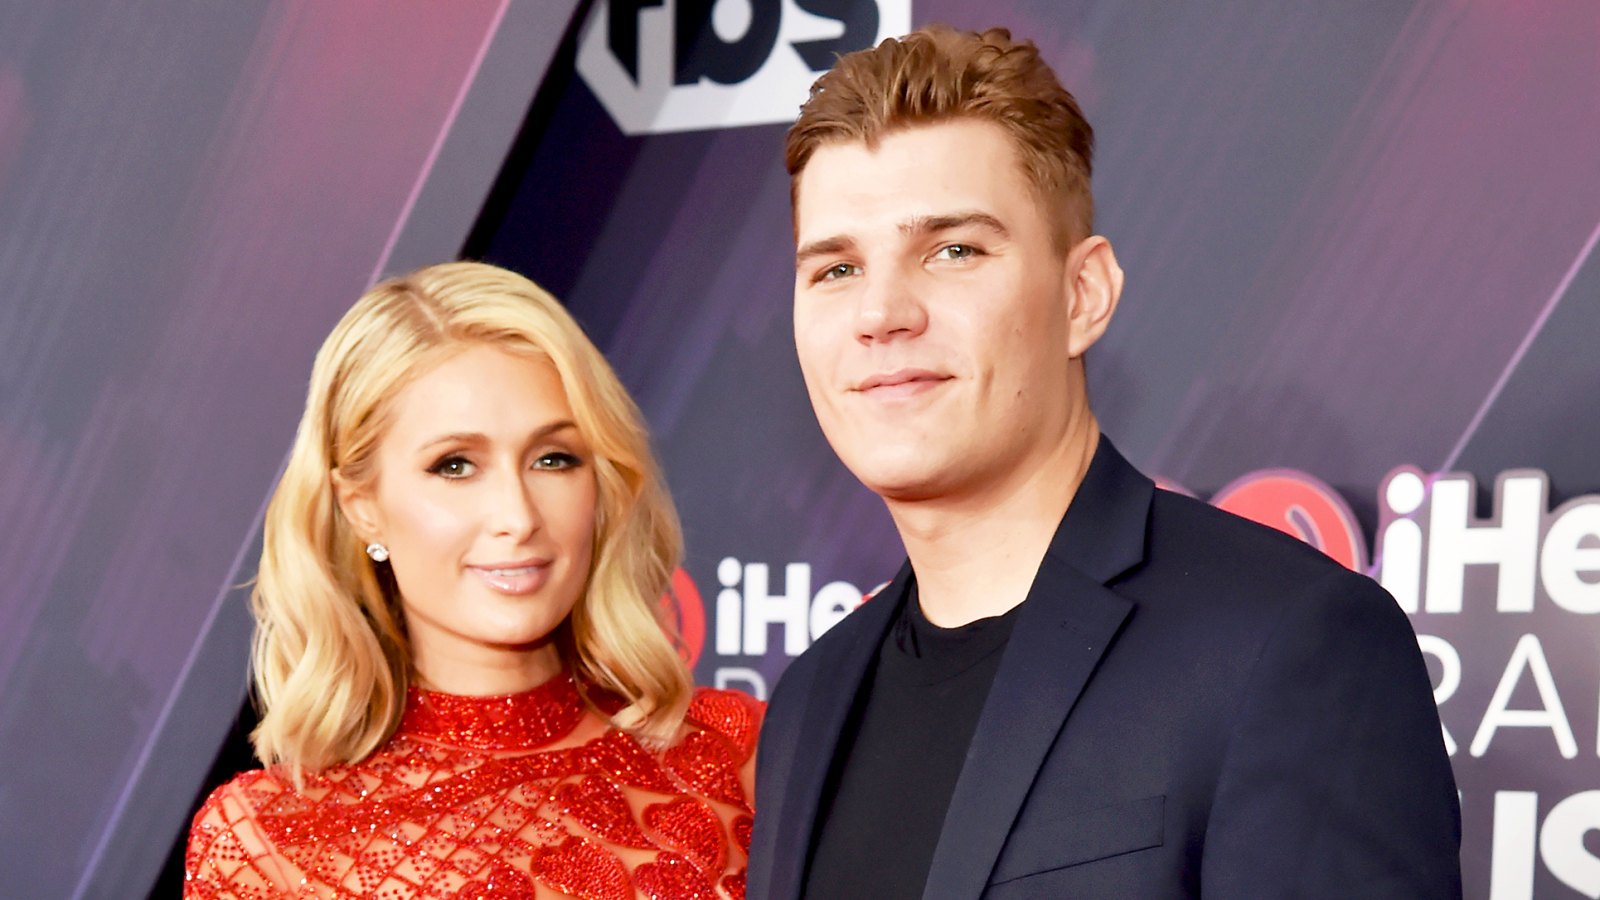 Paris Hilton and Chris Zylka arrive at the 2018 iHeartRadio Music Awards at The Forum in Inglewood, California.